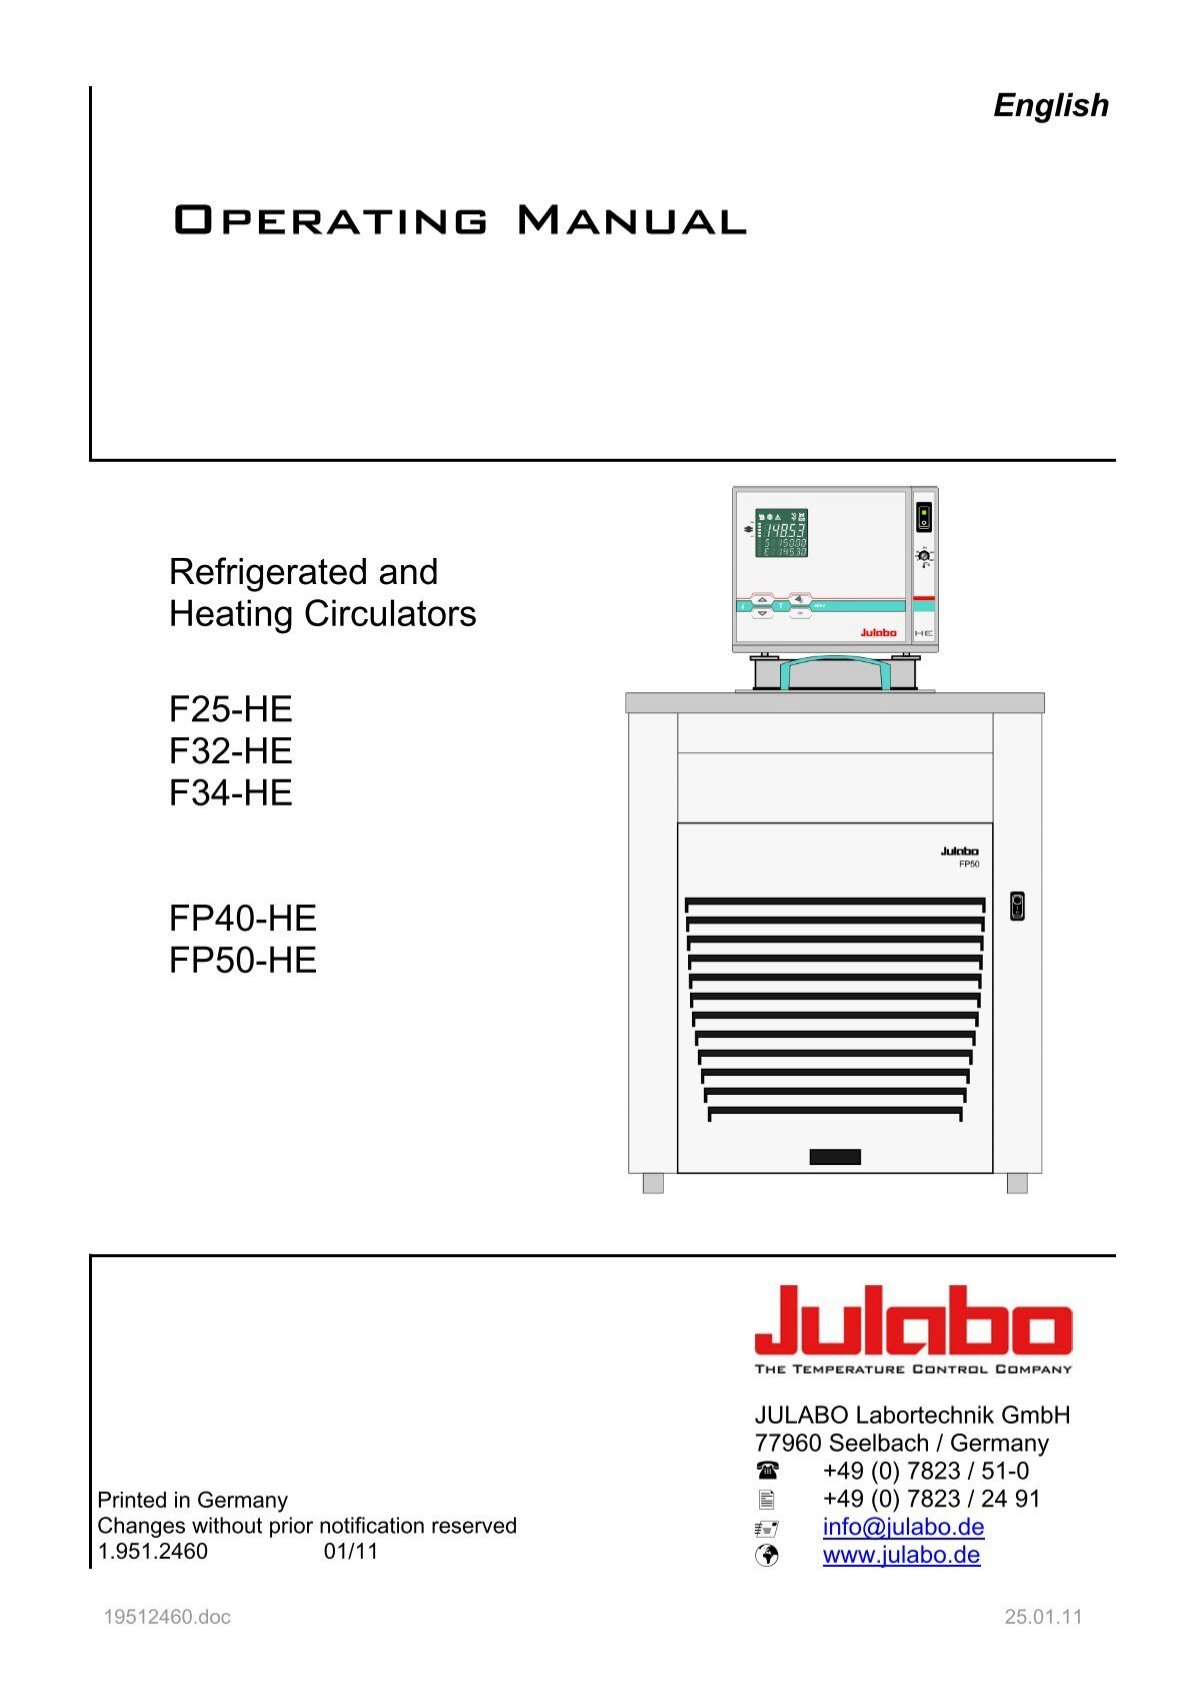 The Effect of Ambient Temperature and Humidity on Refrigerated Temperature  Control Units - JULABO USA